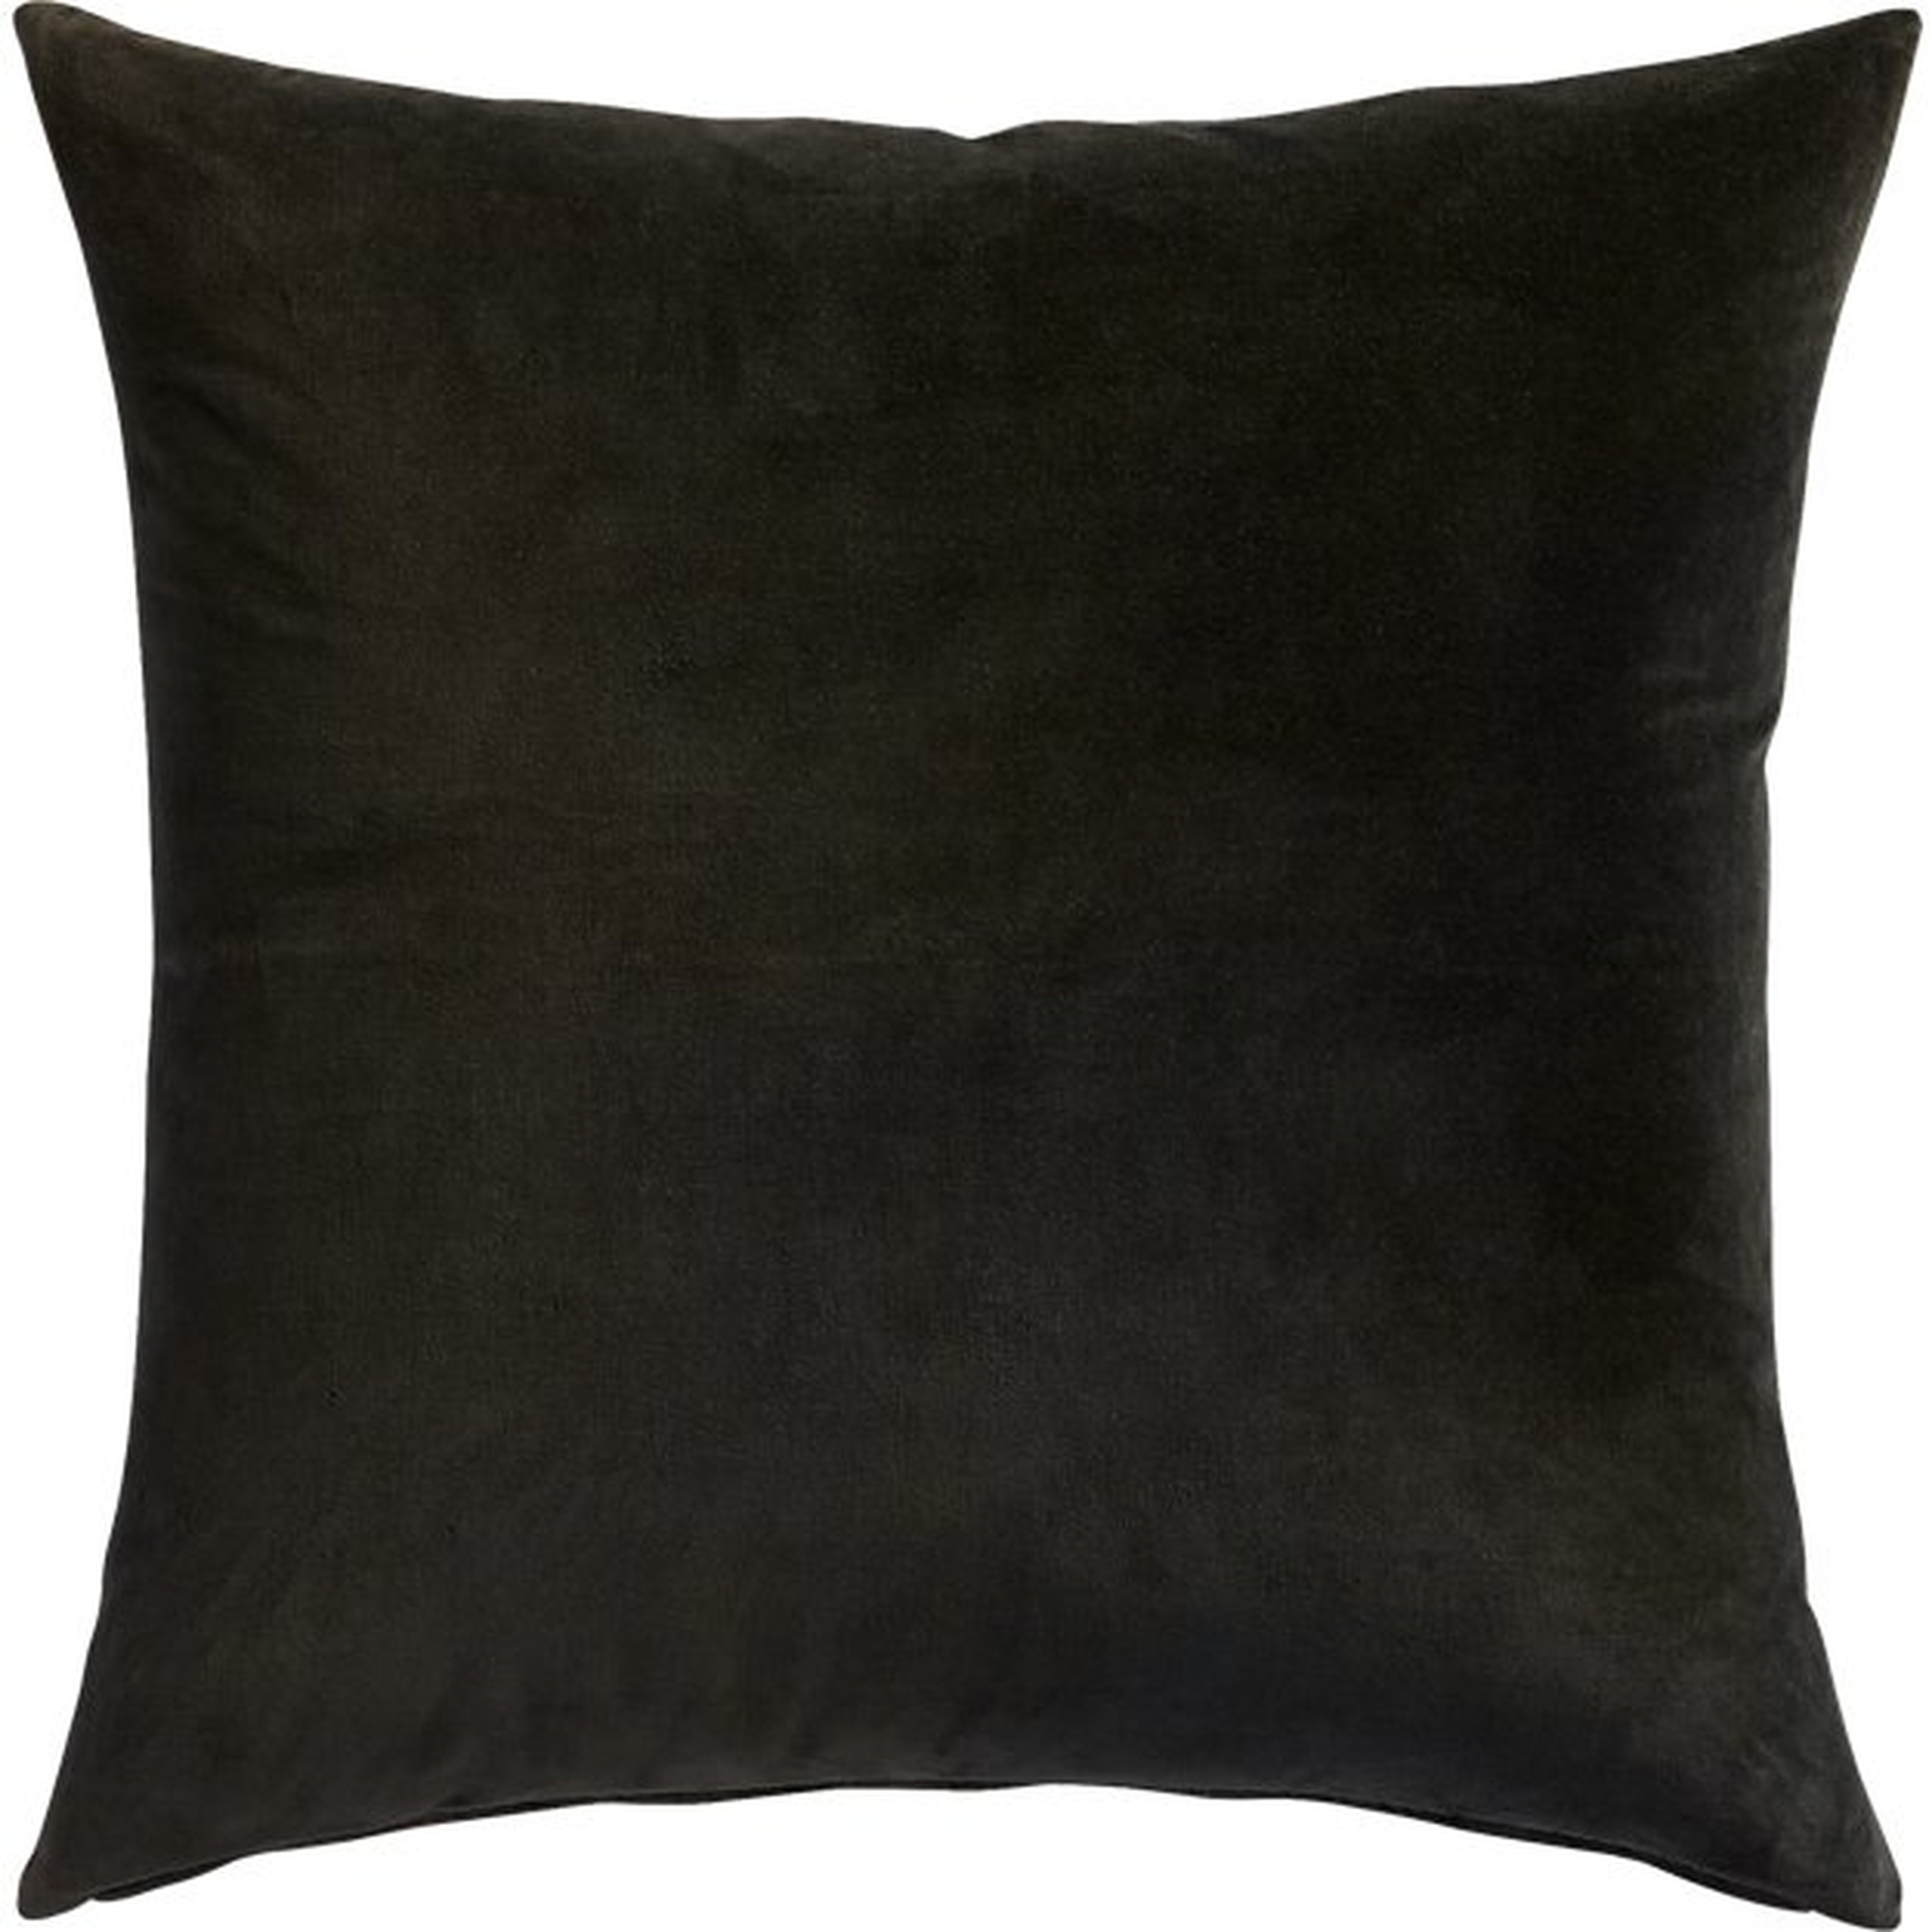 23" leisure black pillow with feather-down insert" - CB2